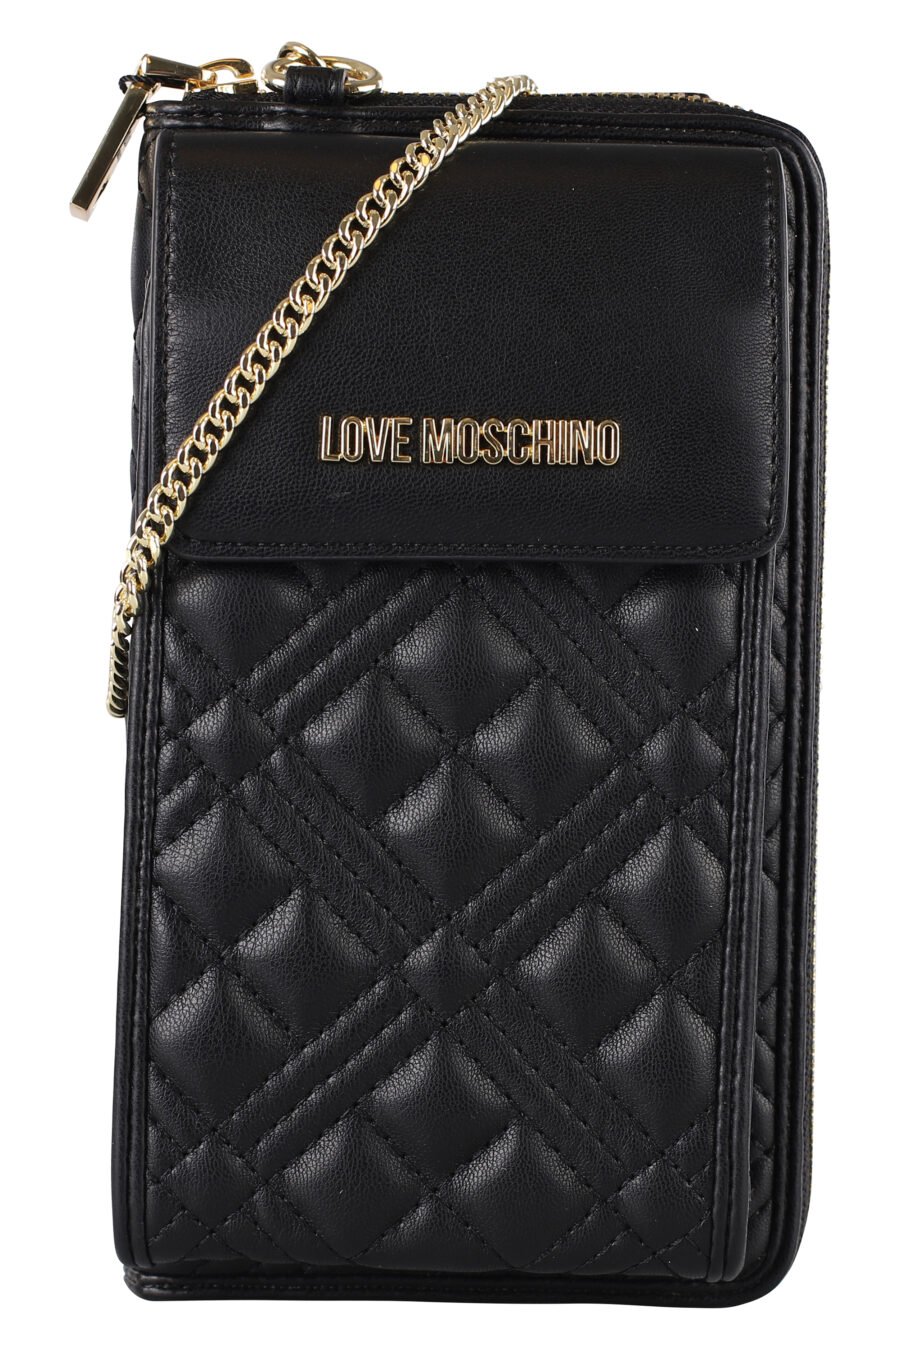 Black padded mobile phone wallet with gold logo - IMG 1261